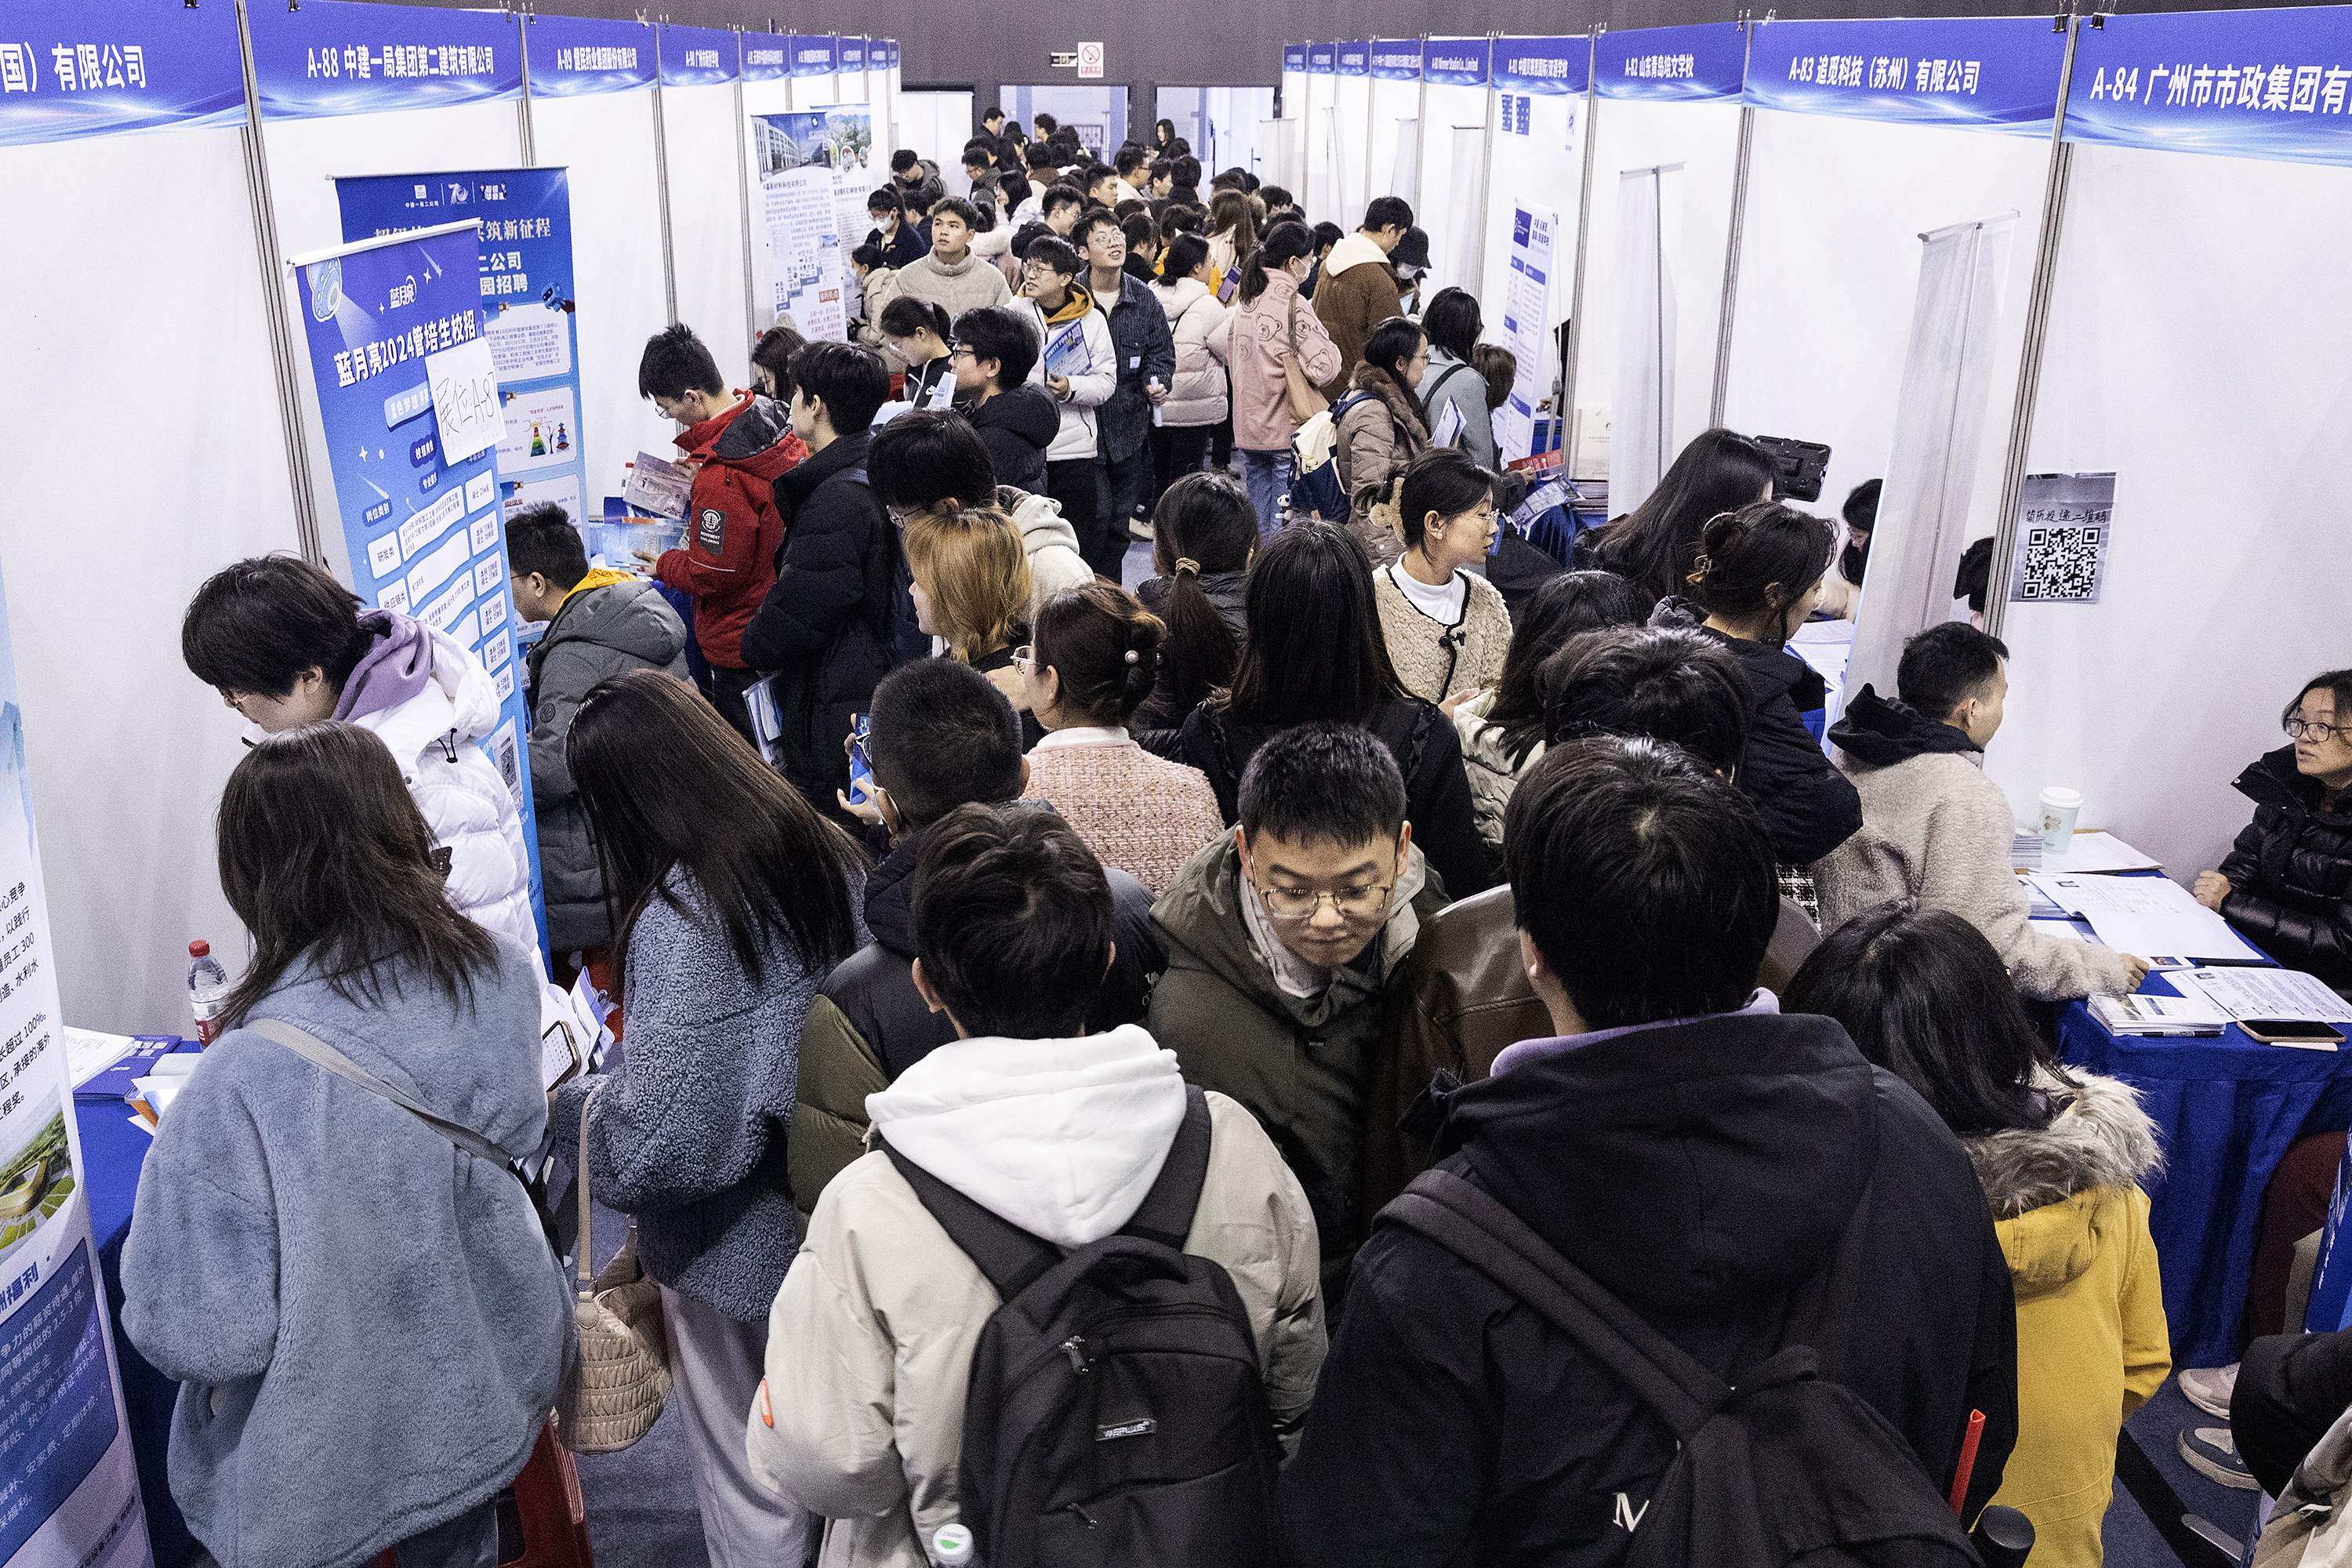 China was criticised for suspending issuing the youth unemployment rate for the 16 to 24 age group in July. Photo: AFP